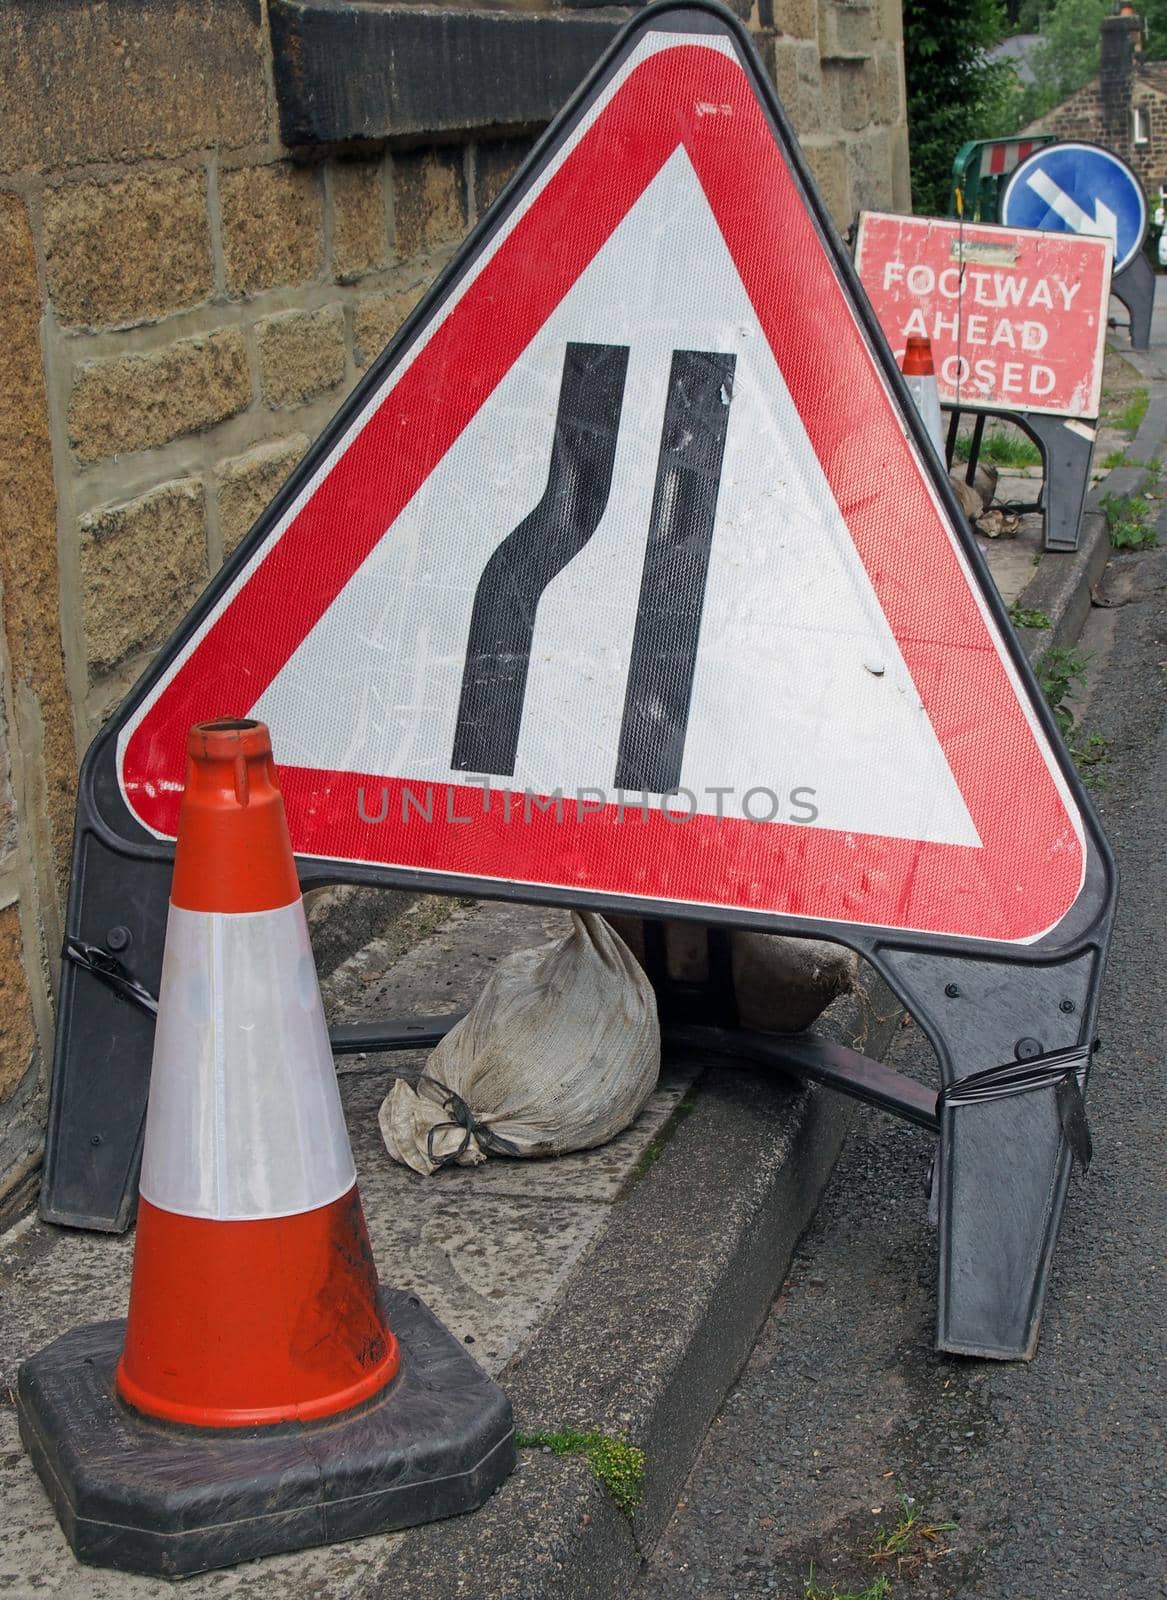 a clutter of temporary warning and direction signs at the side of a narrow country road while repair work is being carried out